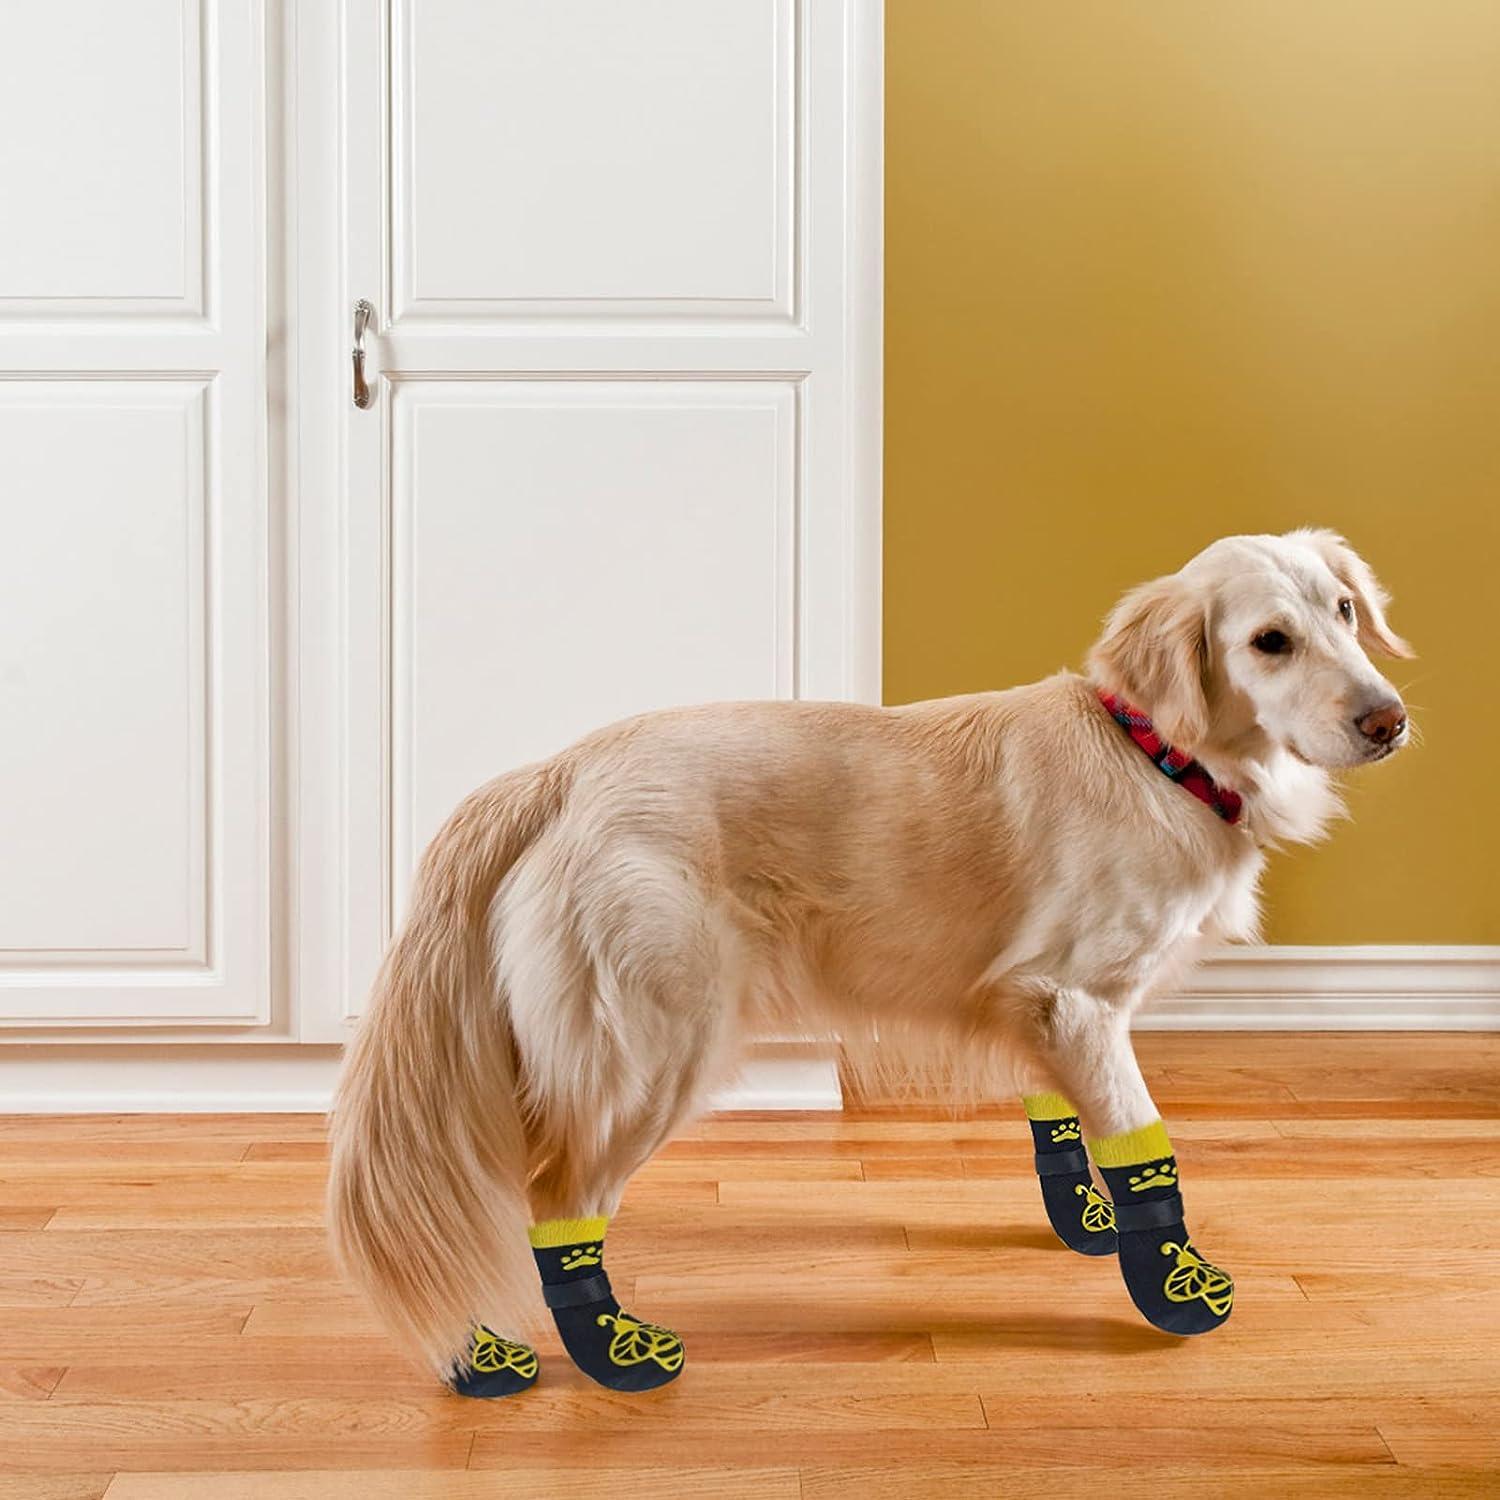 Anti-slip Dog Socks For Dogs 2 Pairs Soft Adjustable Paw Protection Dog  Grip Socks With Strap Traction Control